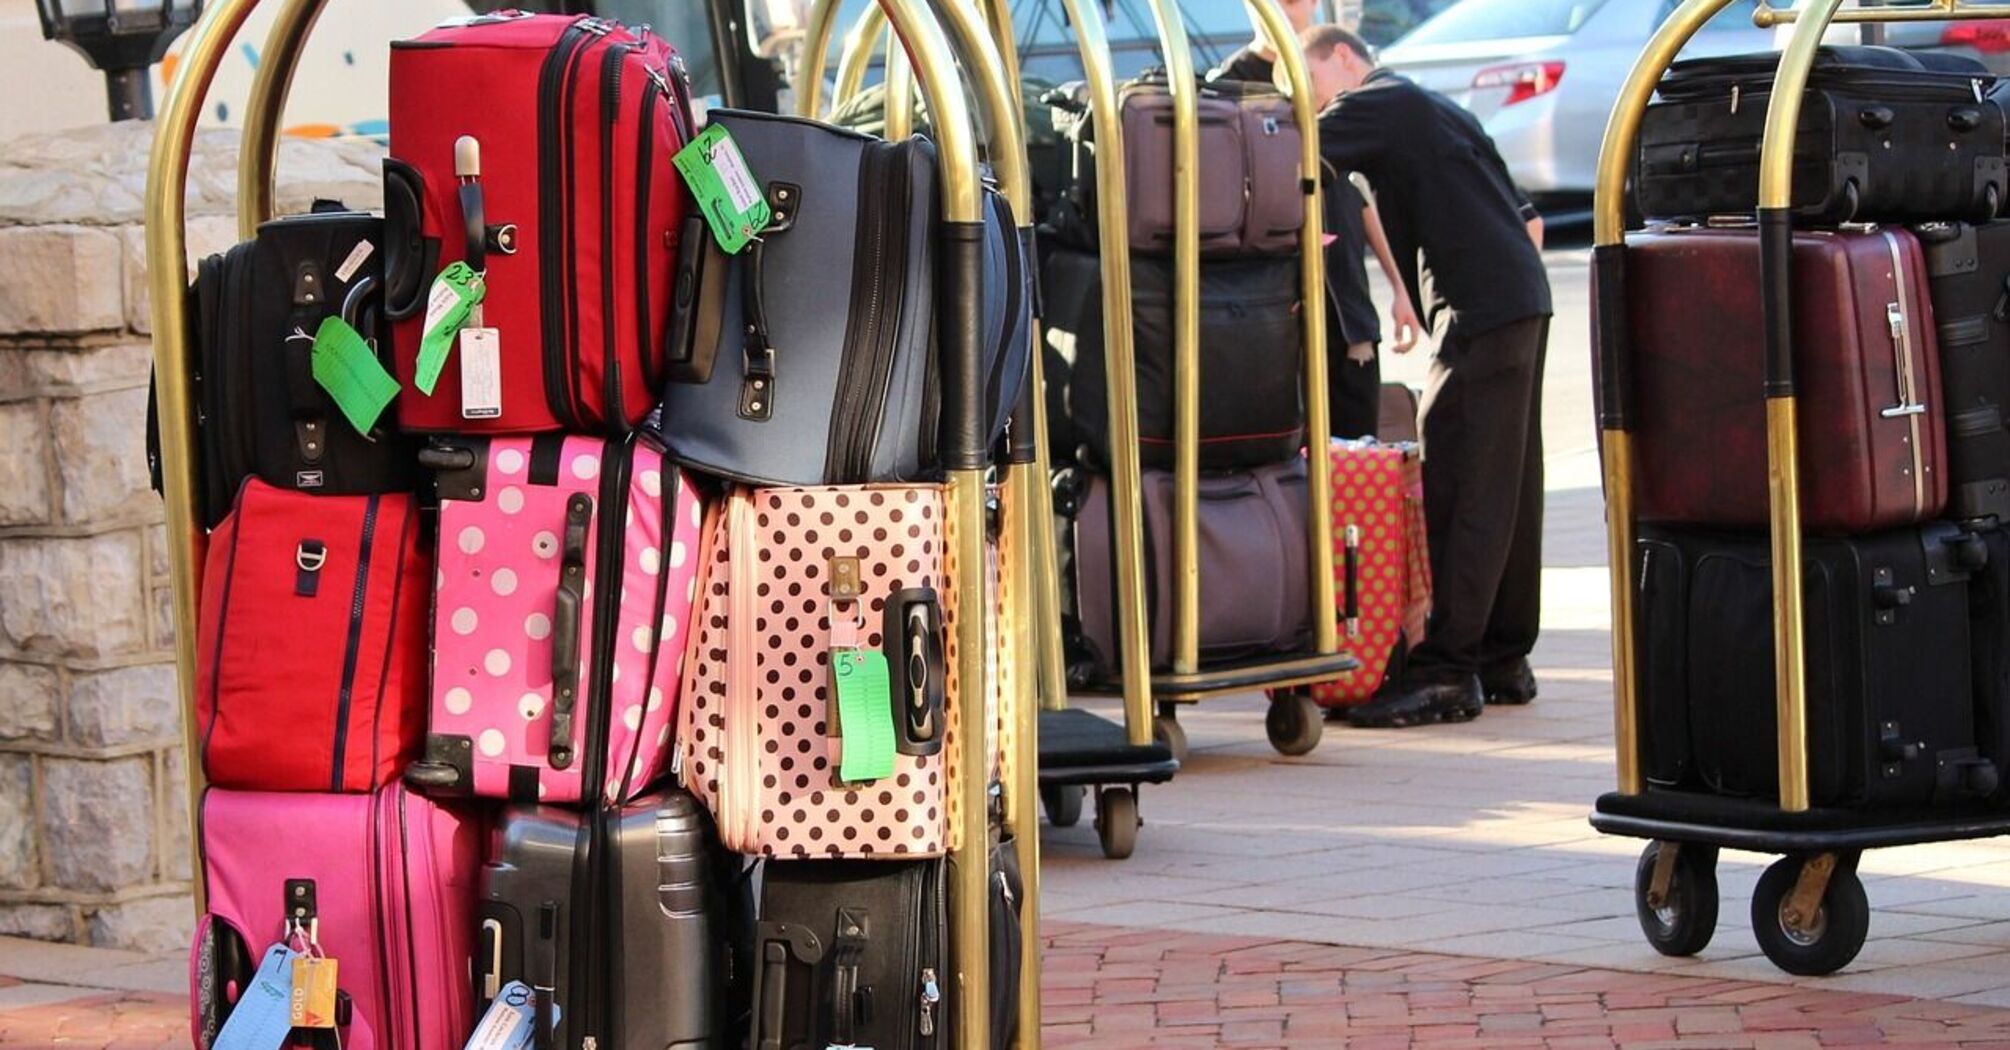 Japanese hotels offer foreign guests the opportunity to unload their luggage